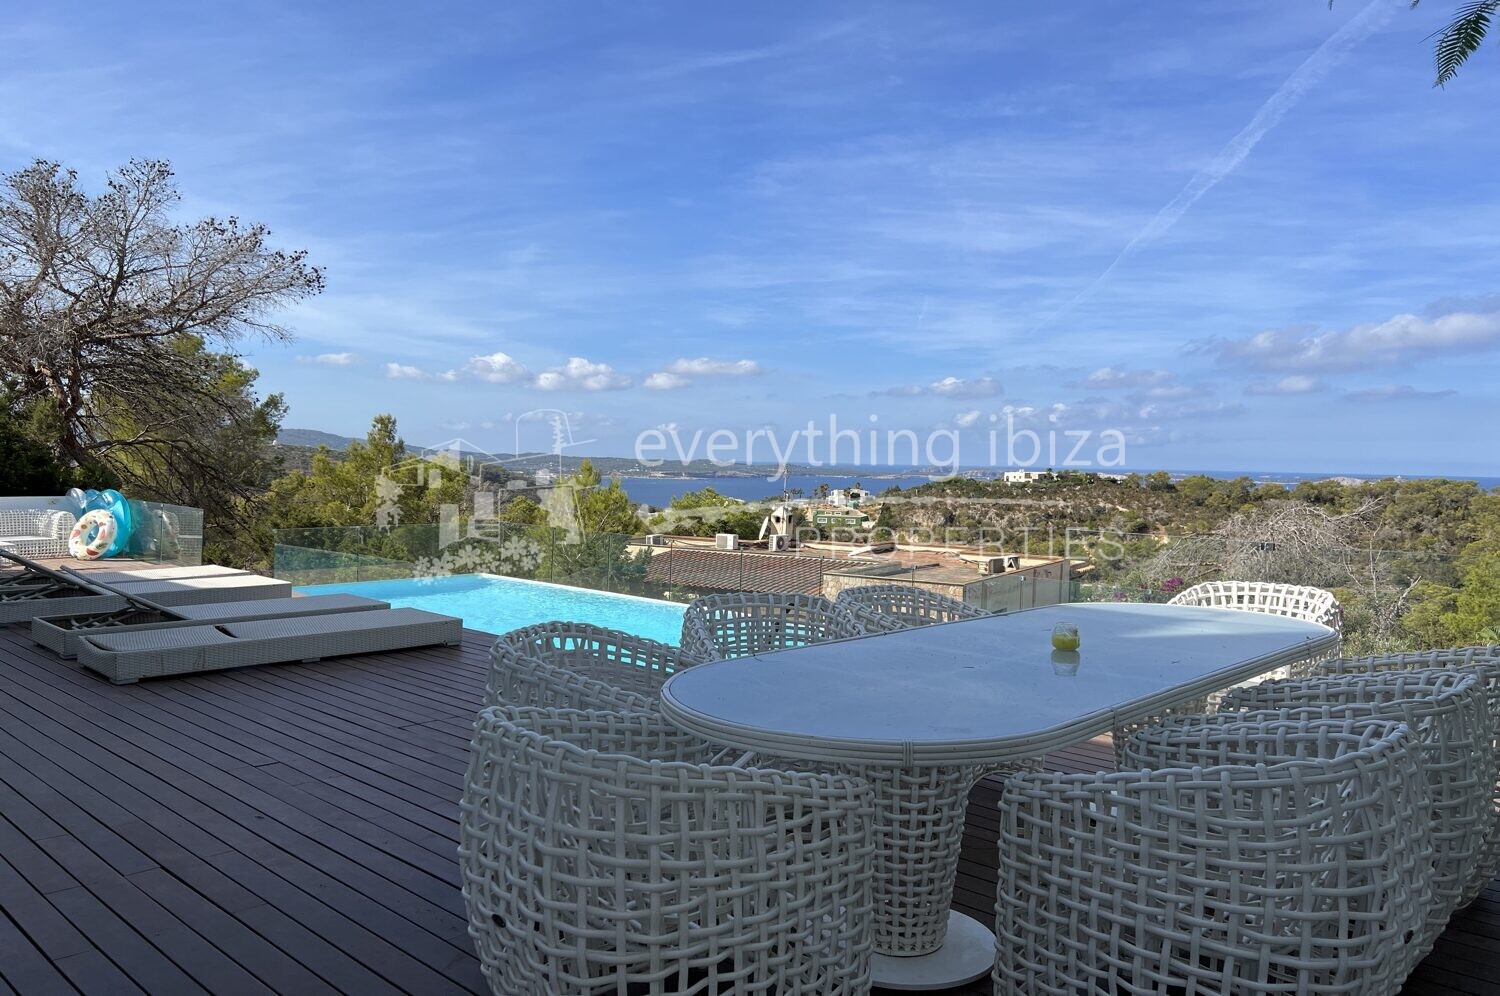 Cosmopolitan Luxury Villa with Stunning Sea & Sunset Views, ref. 1482, for sale in Ibiza by everything ibiza Properties